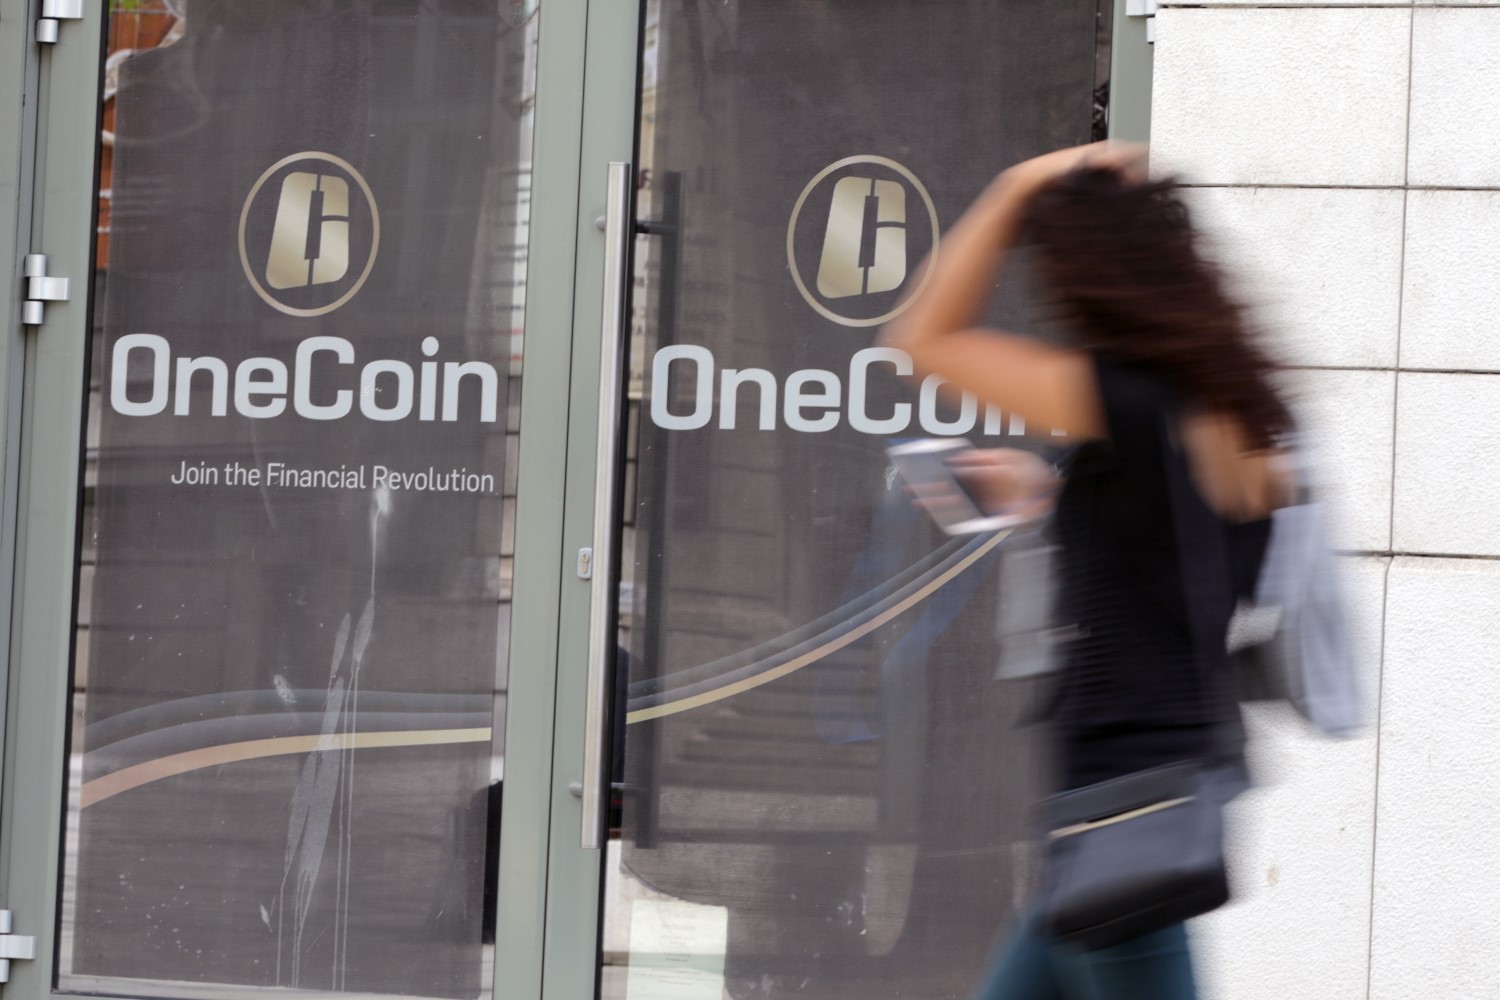 Crypto-ponzi-onecoin-may-have-used-flood-of-fake-reviews-to-boost-ailing-image